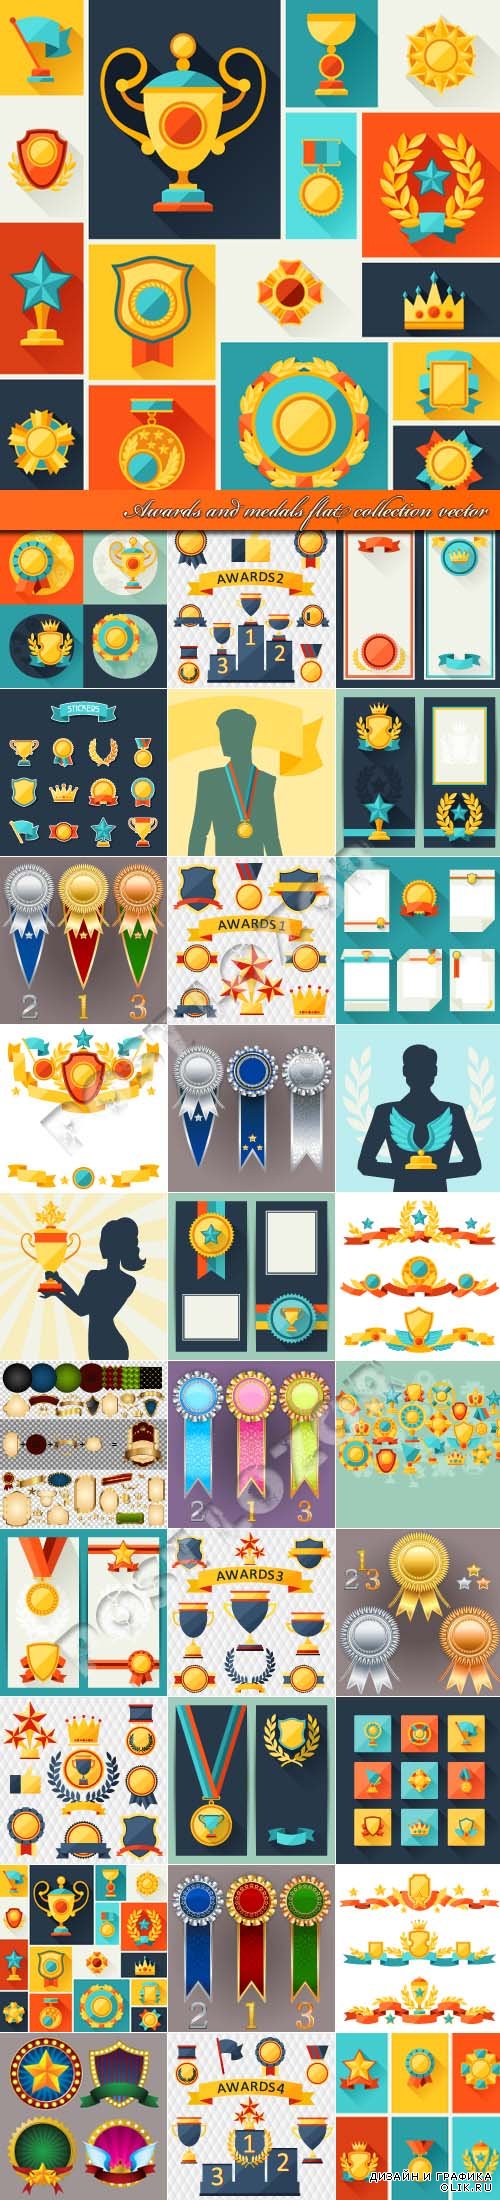 Awards and medals flat collection vector